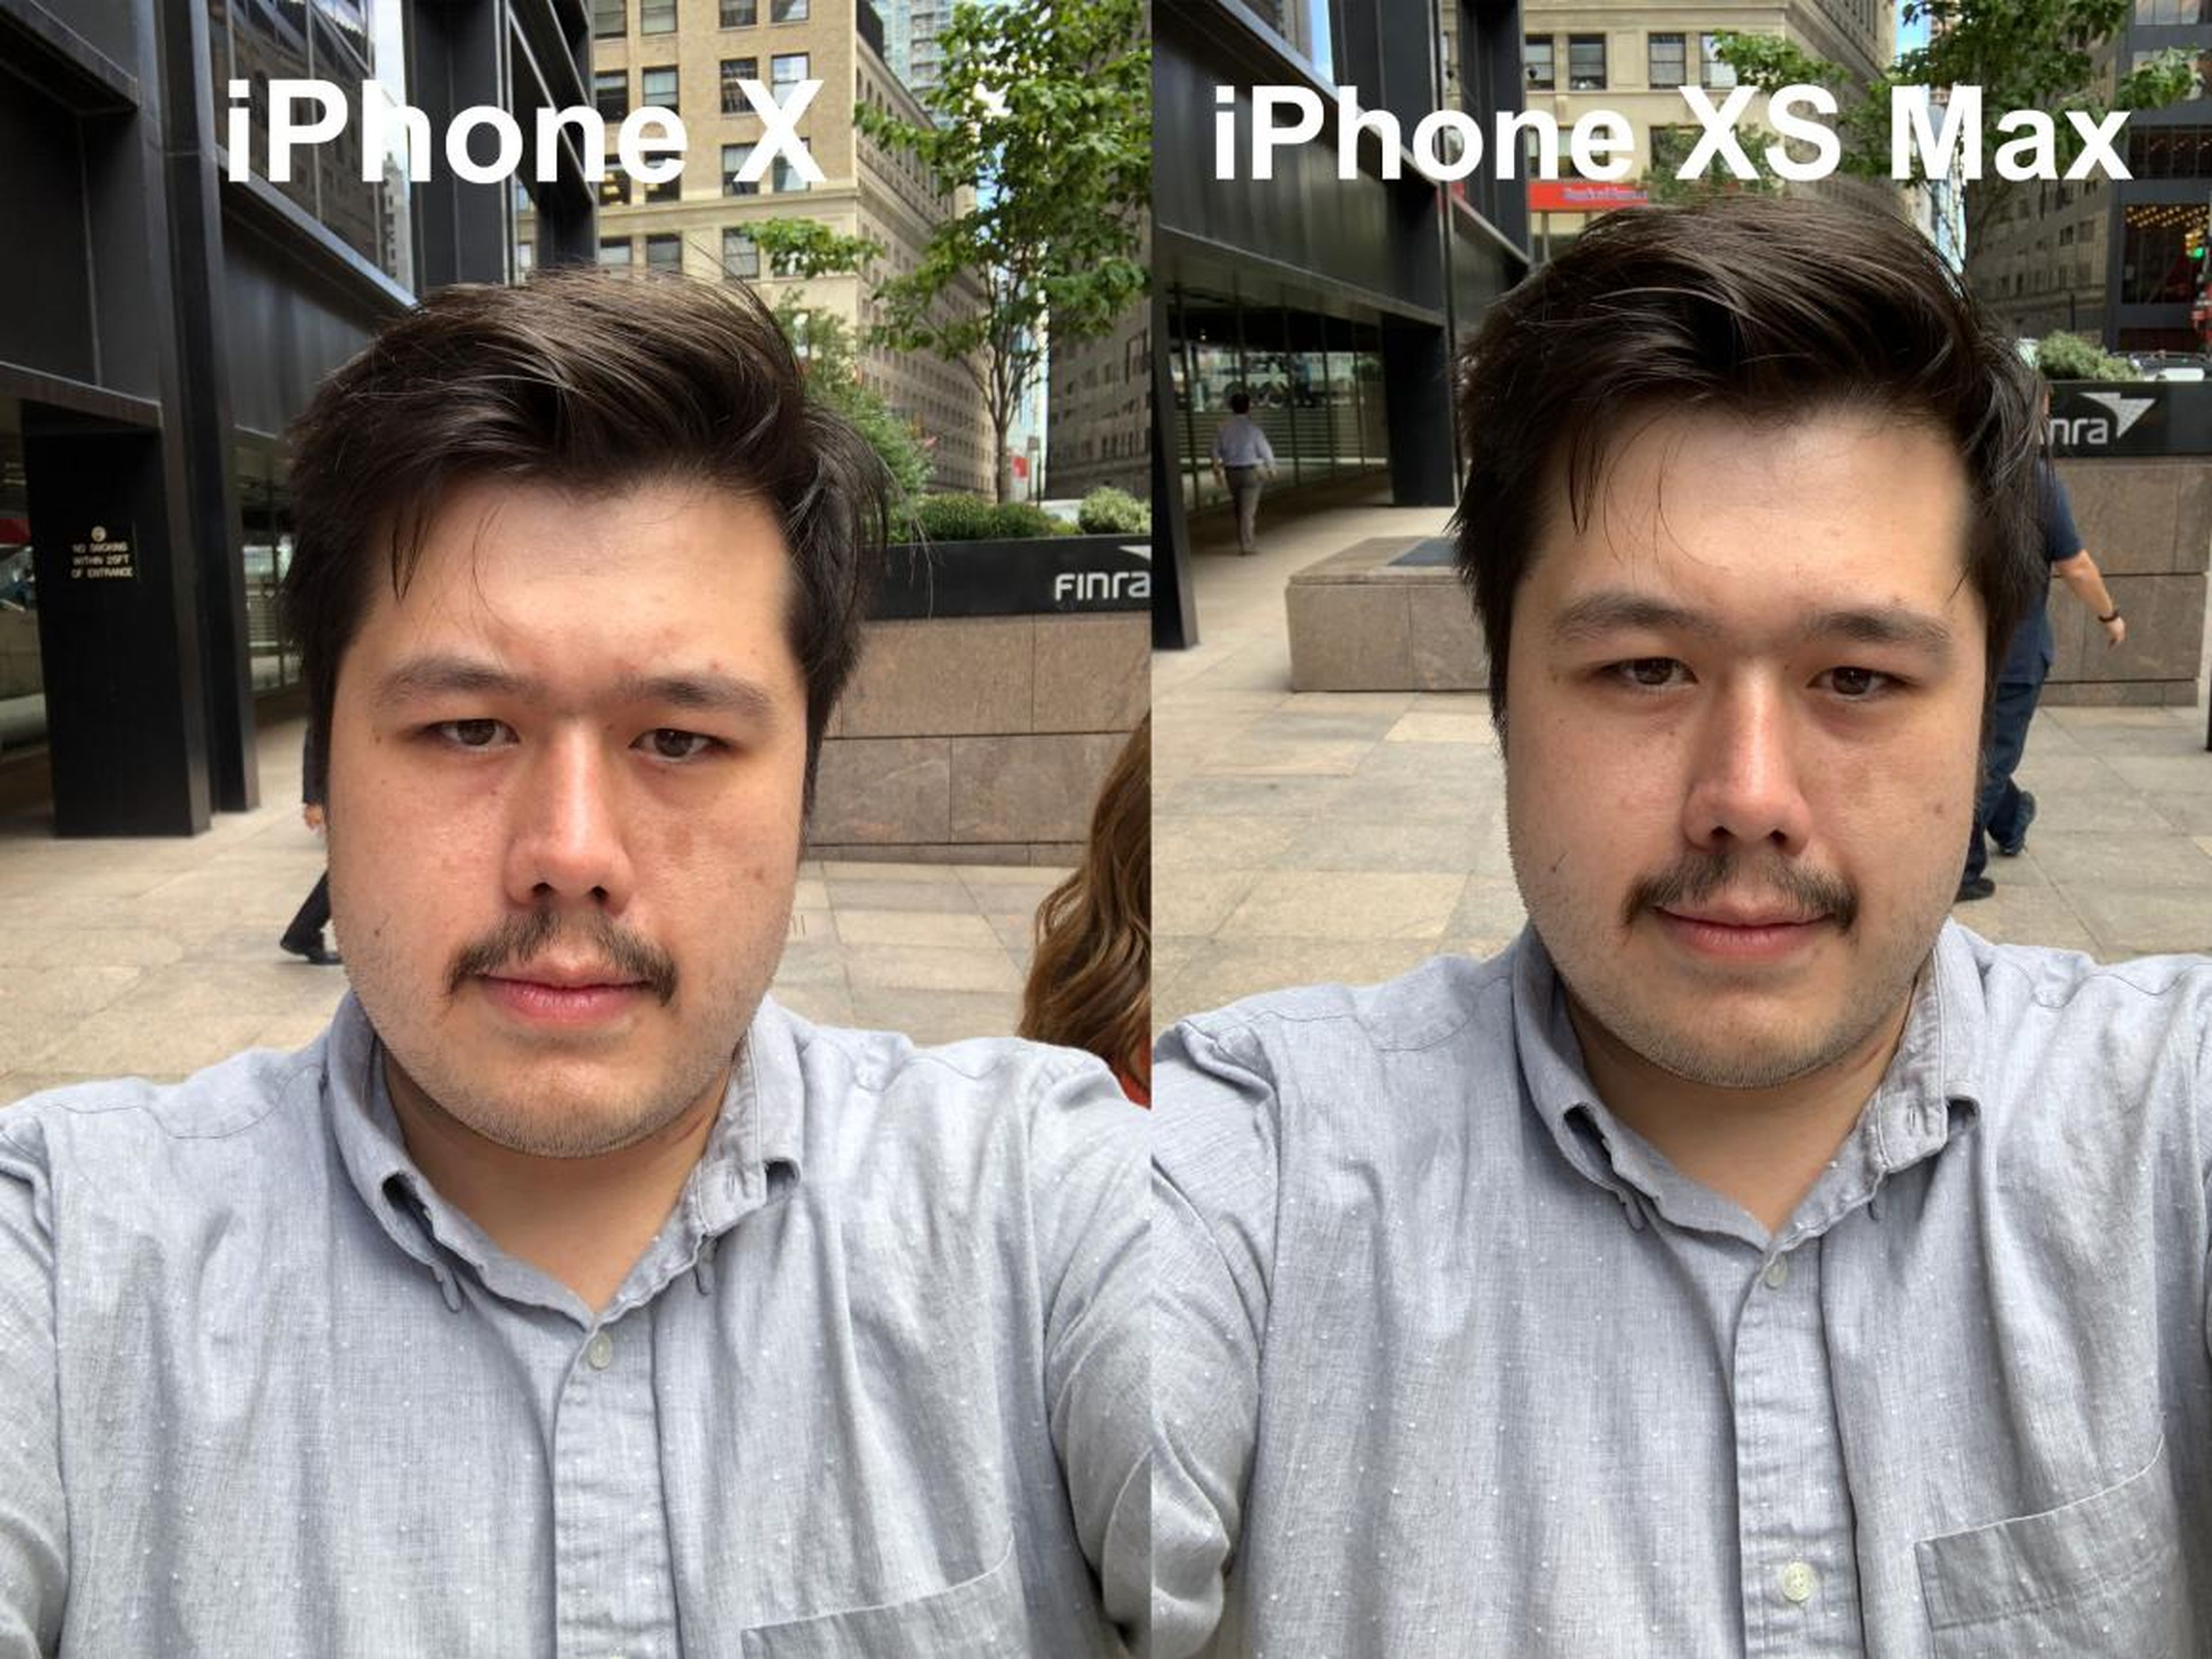 The iPhone XS changed Kif's face color, and his skin was also a little smoother in the iPhone XS' selfie.